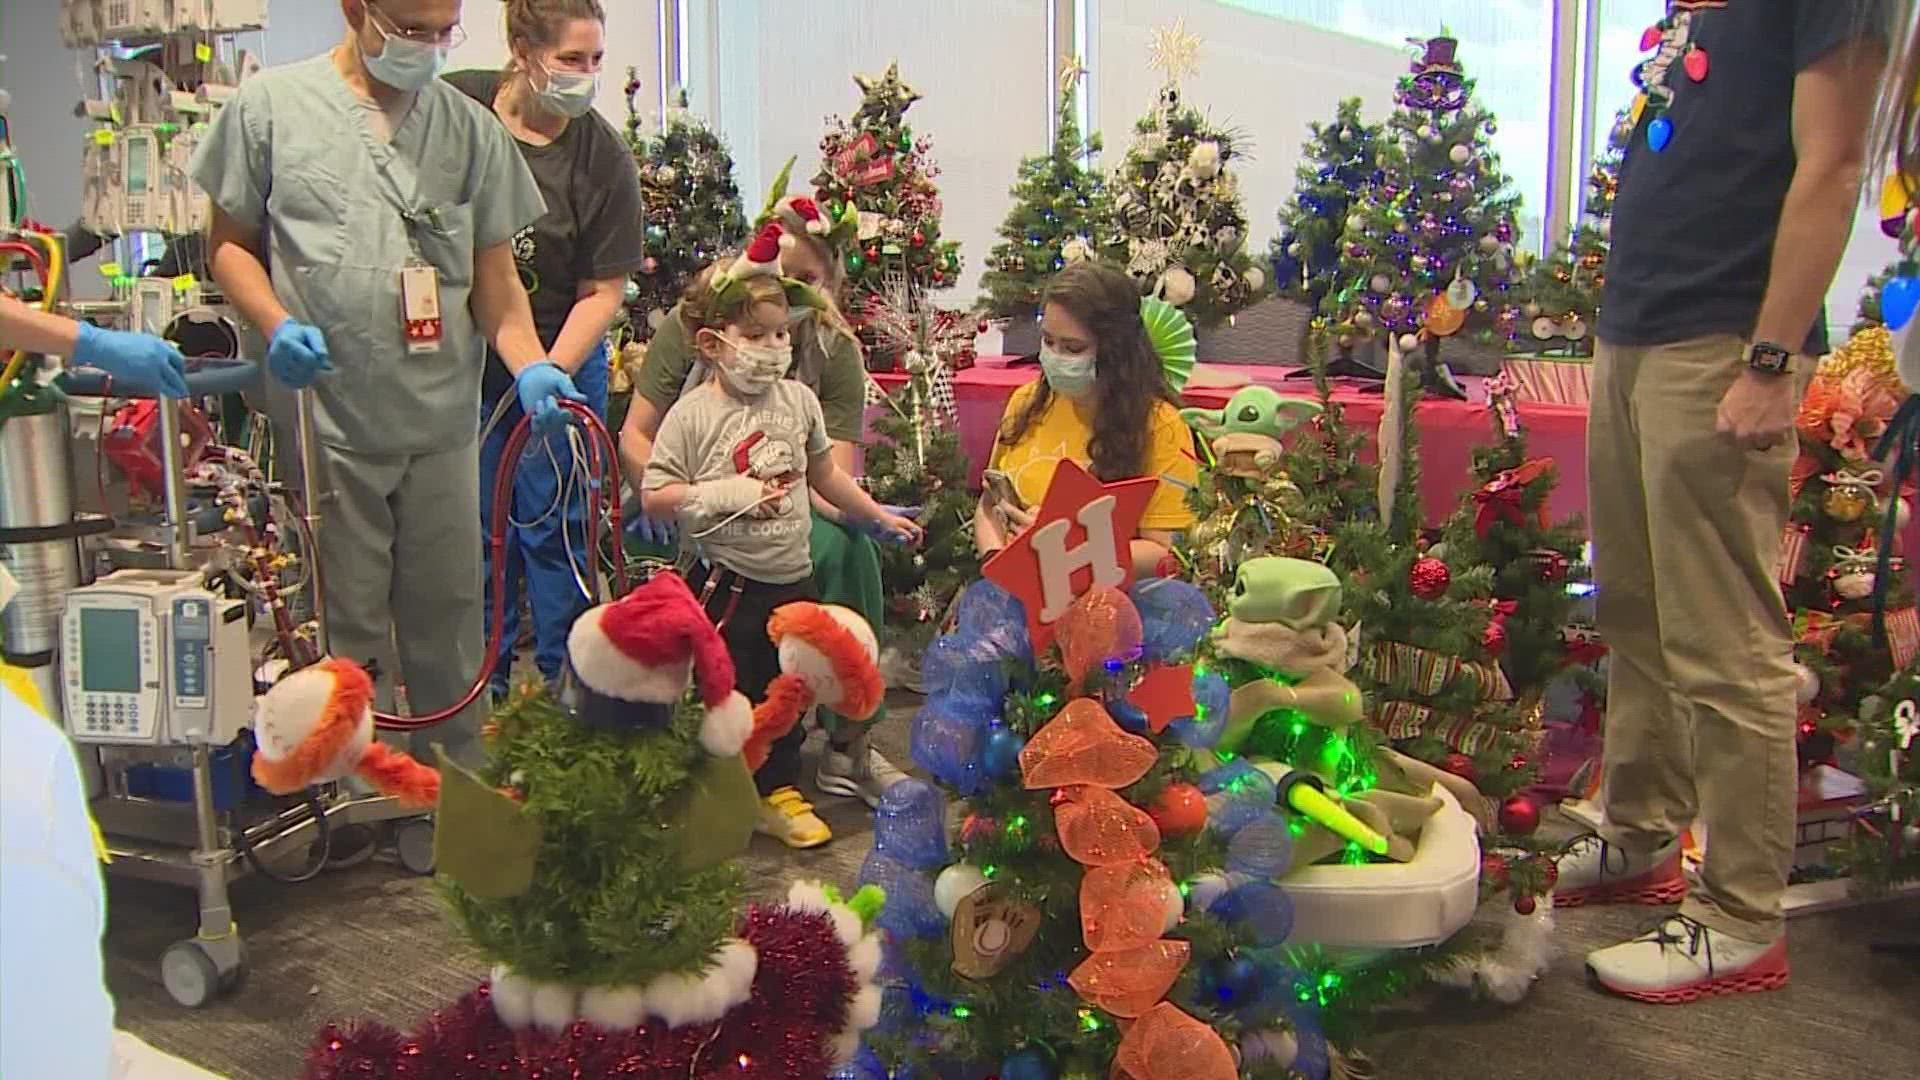 Texas Children\'s Hospital brings holiday joy with Christmas trees ...